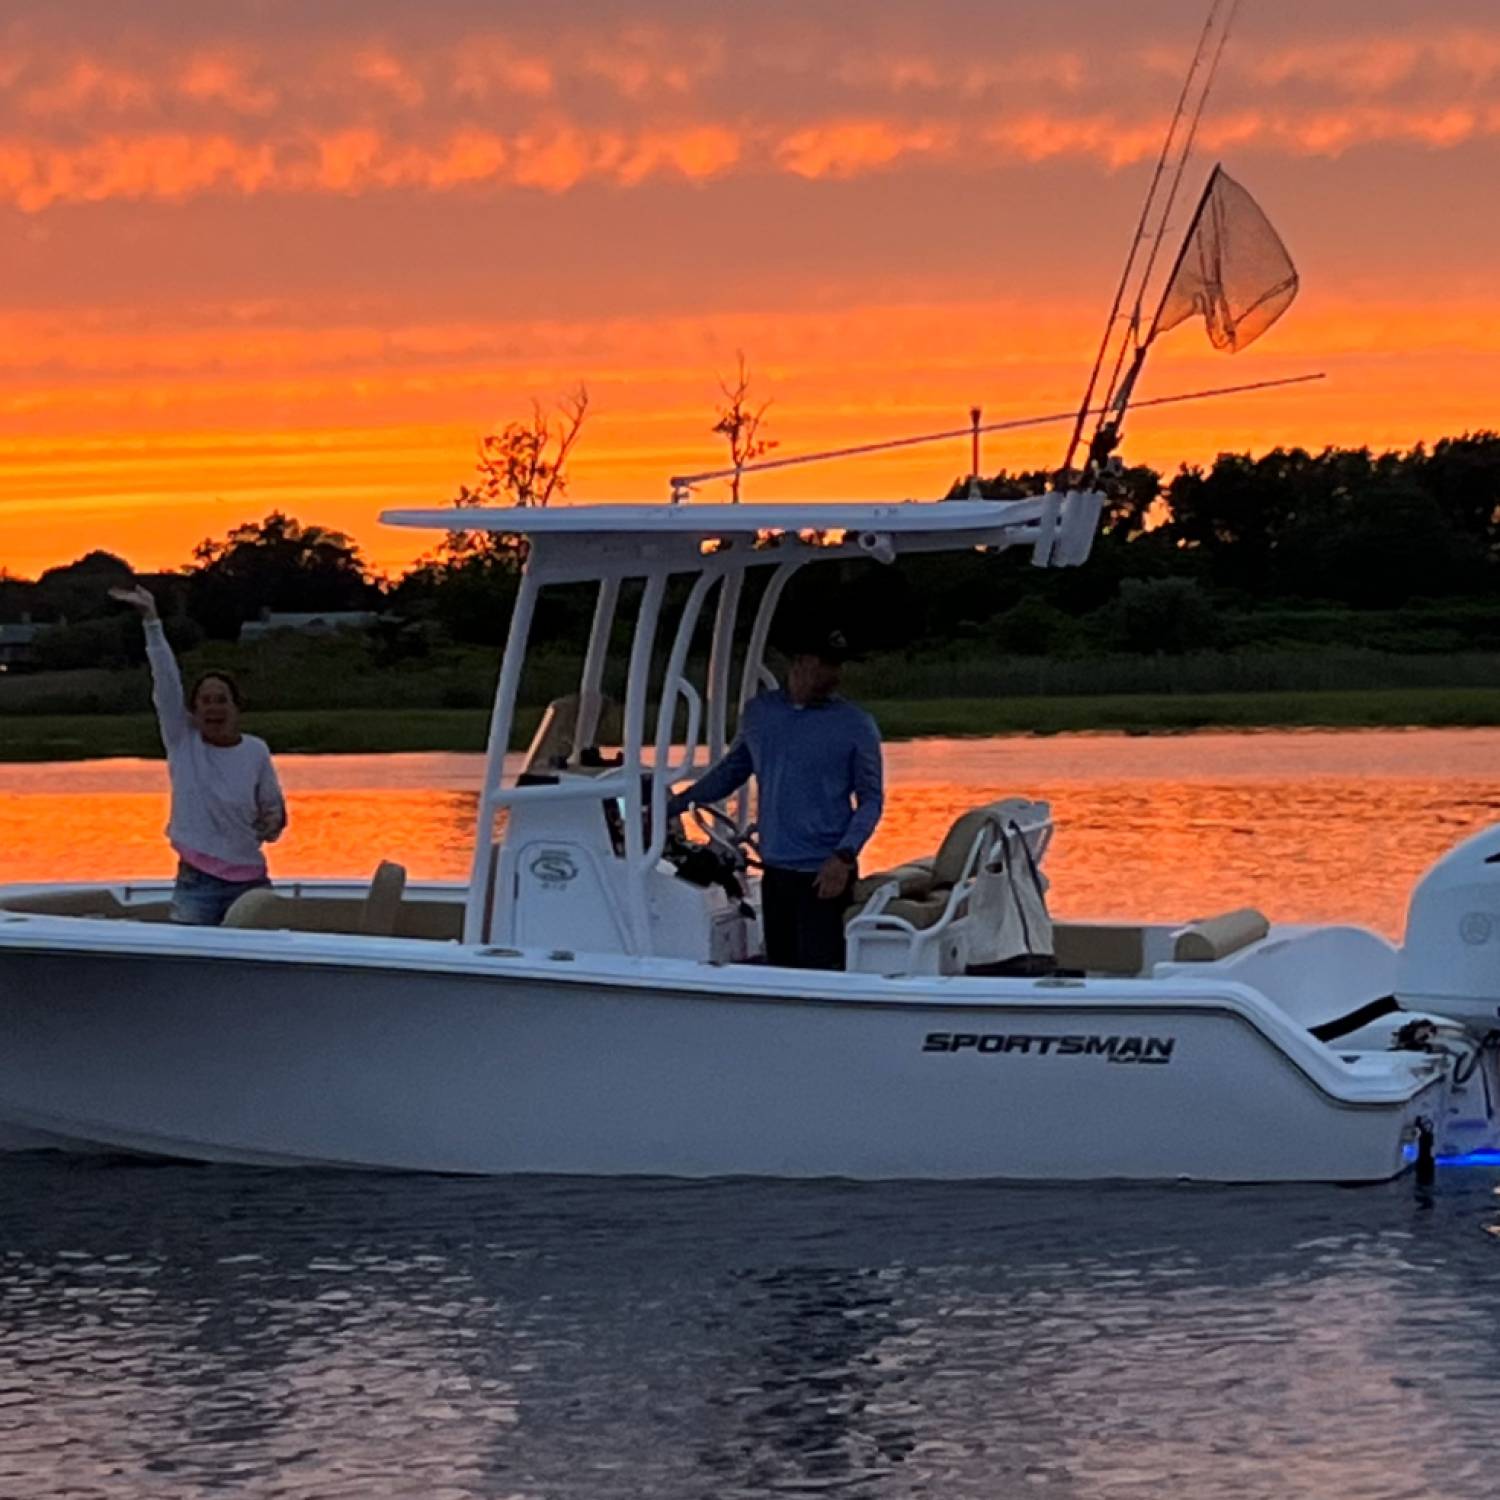 Title: First night on the new boat! - On board their Sportsman Open 212 Center Console - Location: Shrewsbury River, Monmouth Beach NJ. Participating in the Photo Contest #SportsmanJuly